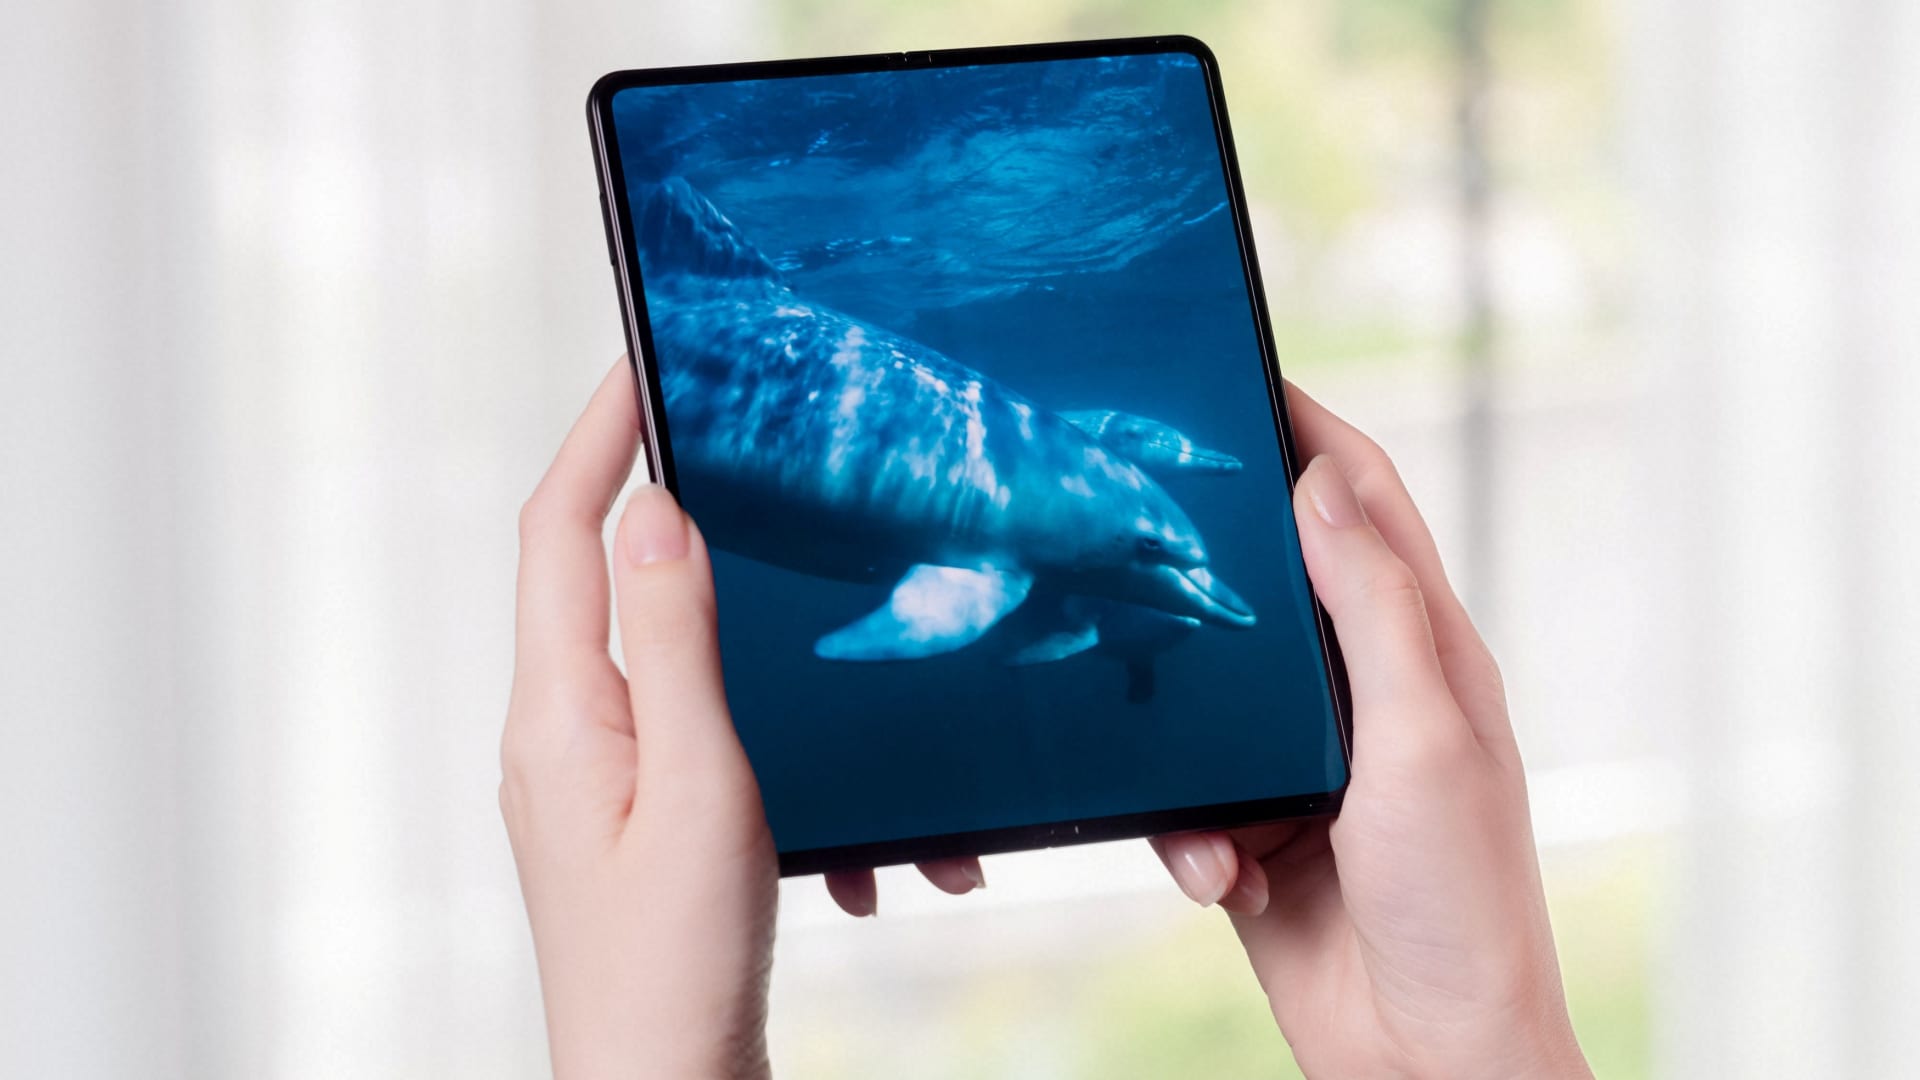 Samsung Electronics' foldable smartphone Galaxy Z Fold3 is seen in this undated handout photo released to Reuters on August 11, 2021.